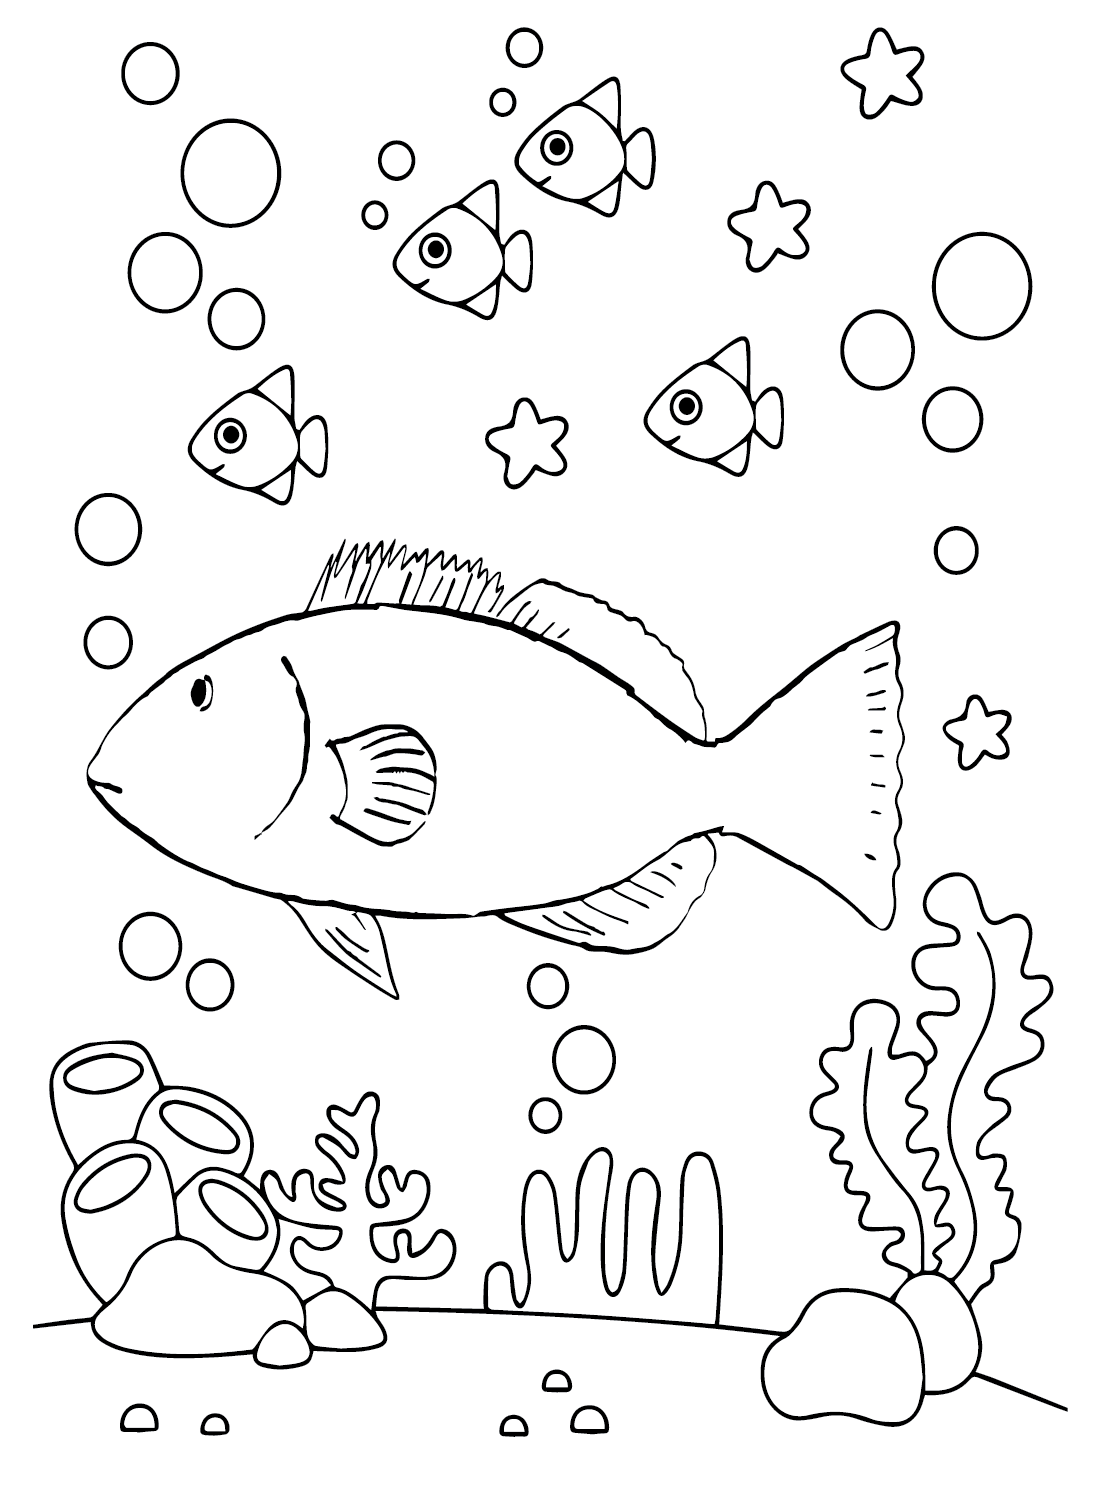 Drawing Grouper from Grouper